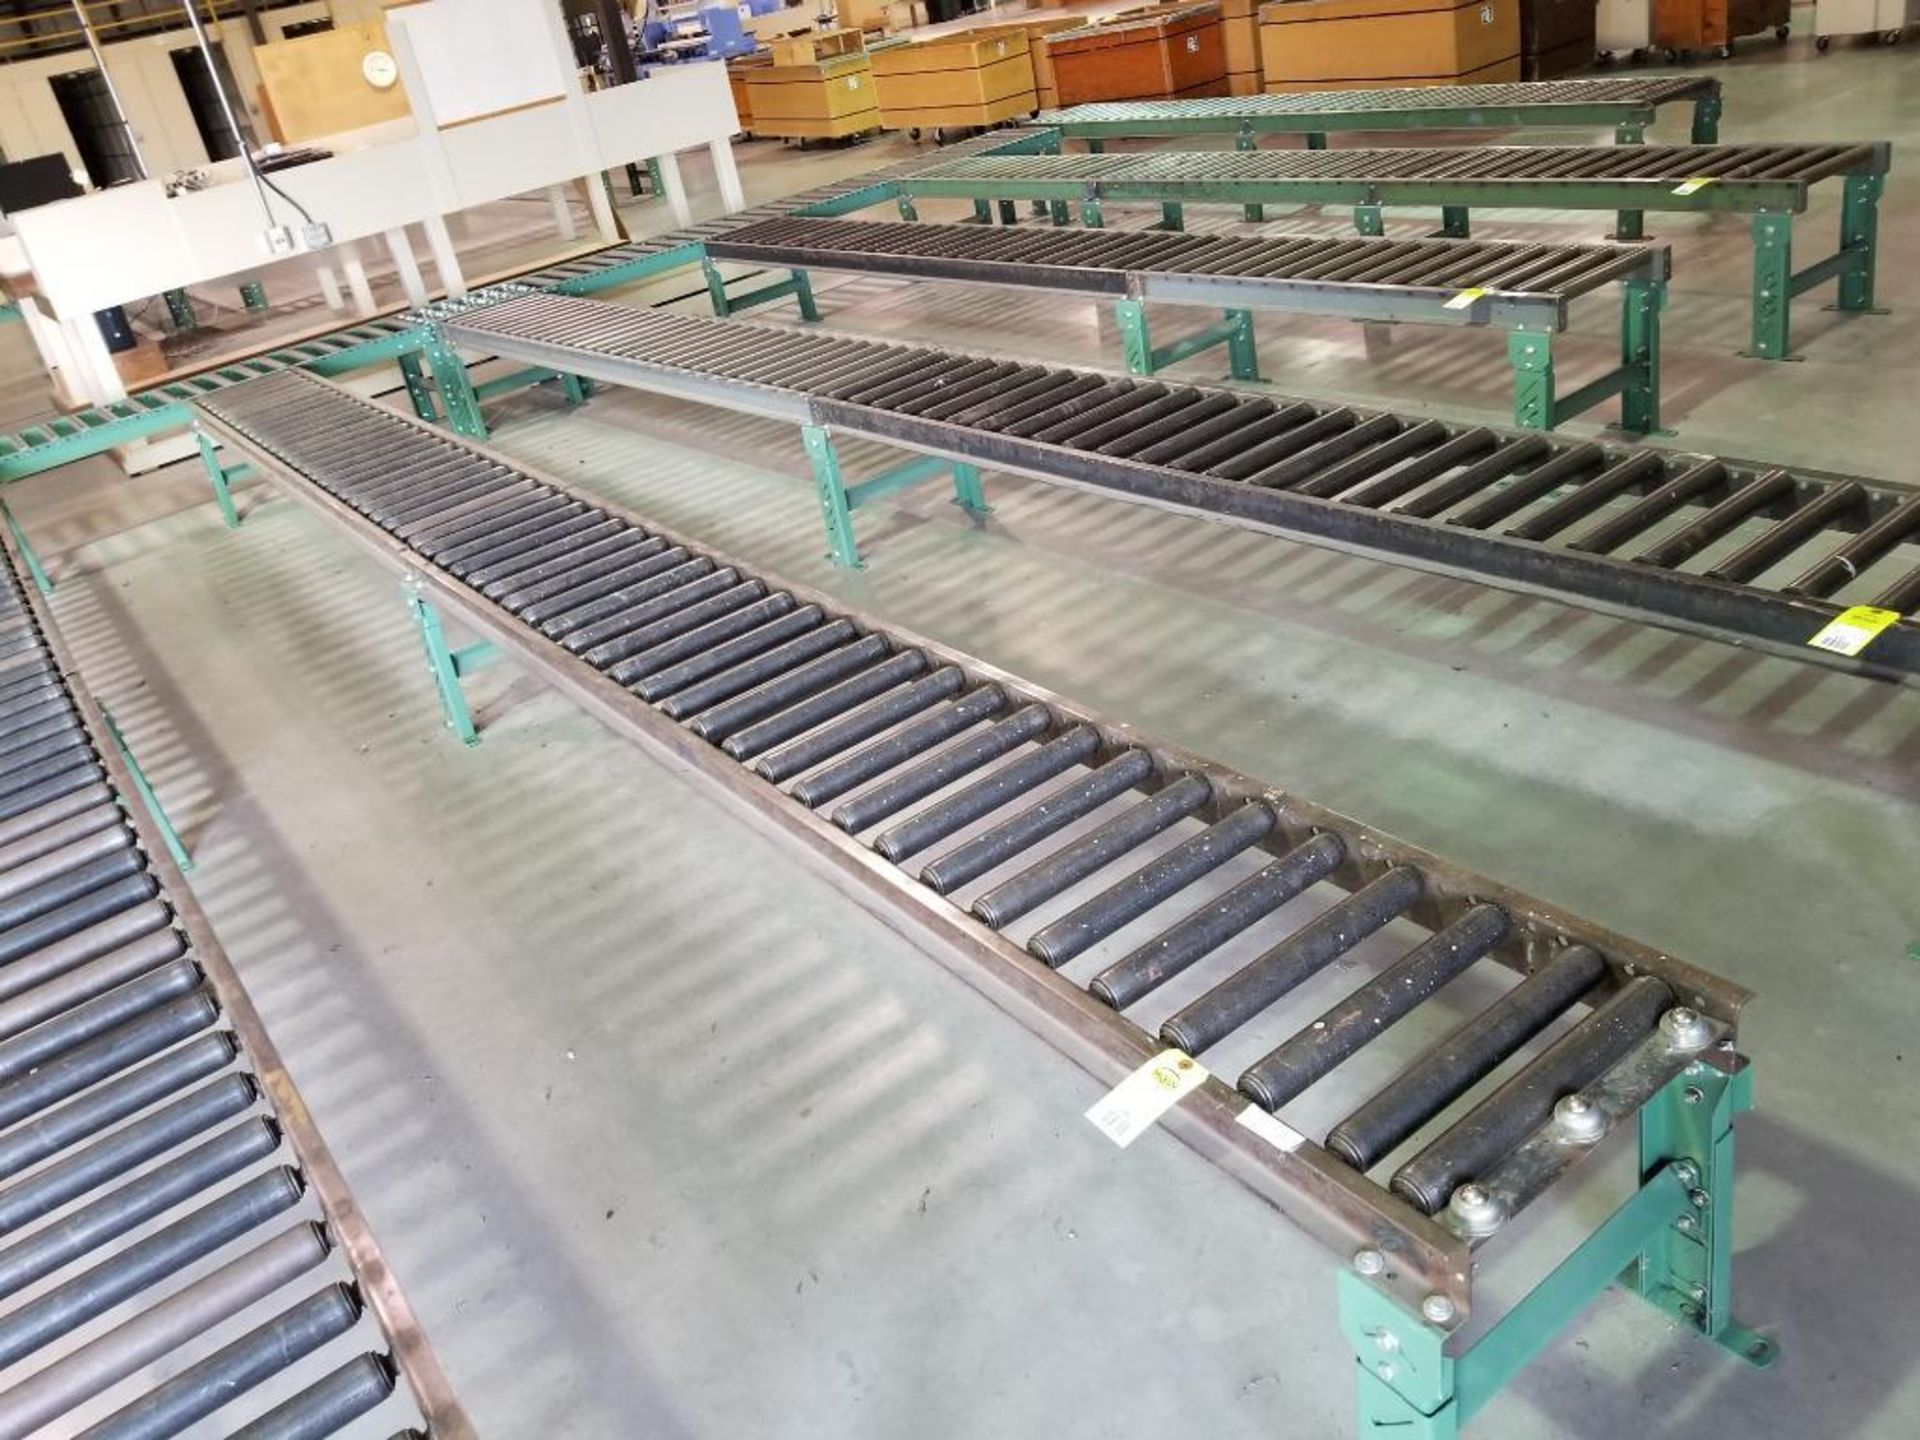 20ft roller conveyor section. 18in wide by 20in tall. (legs are adjustable to change height)